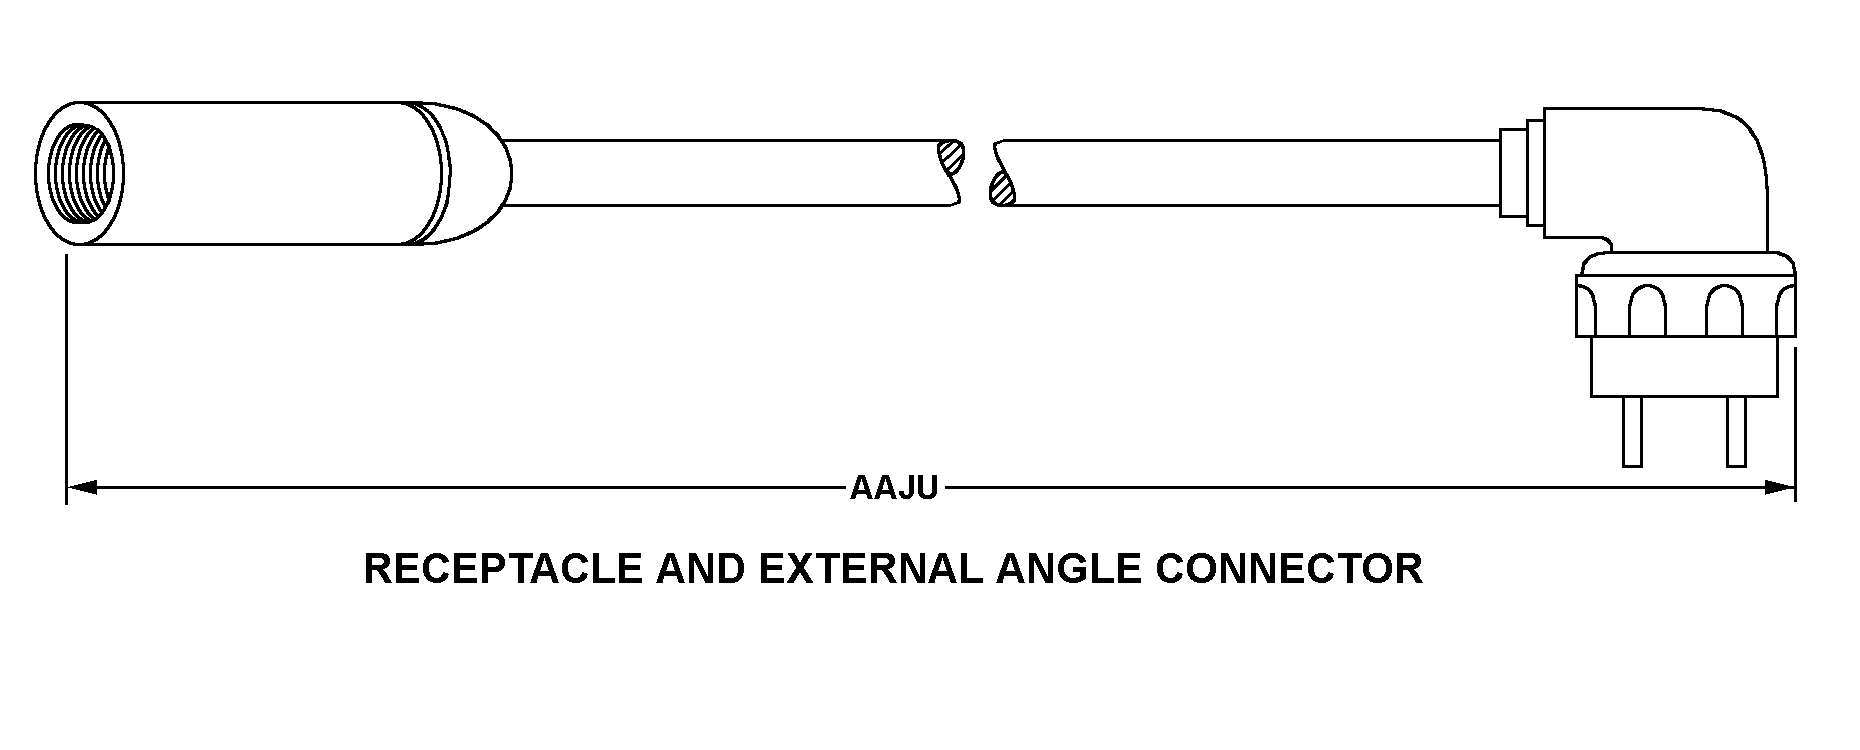 RECEPTACLE AND EXTERNAL ANGLE CONNECTOR style nsn 5995-01-107-0953